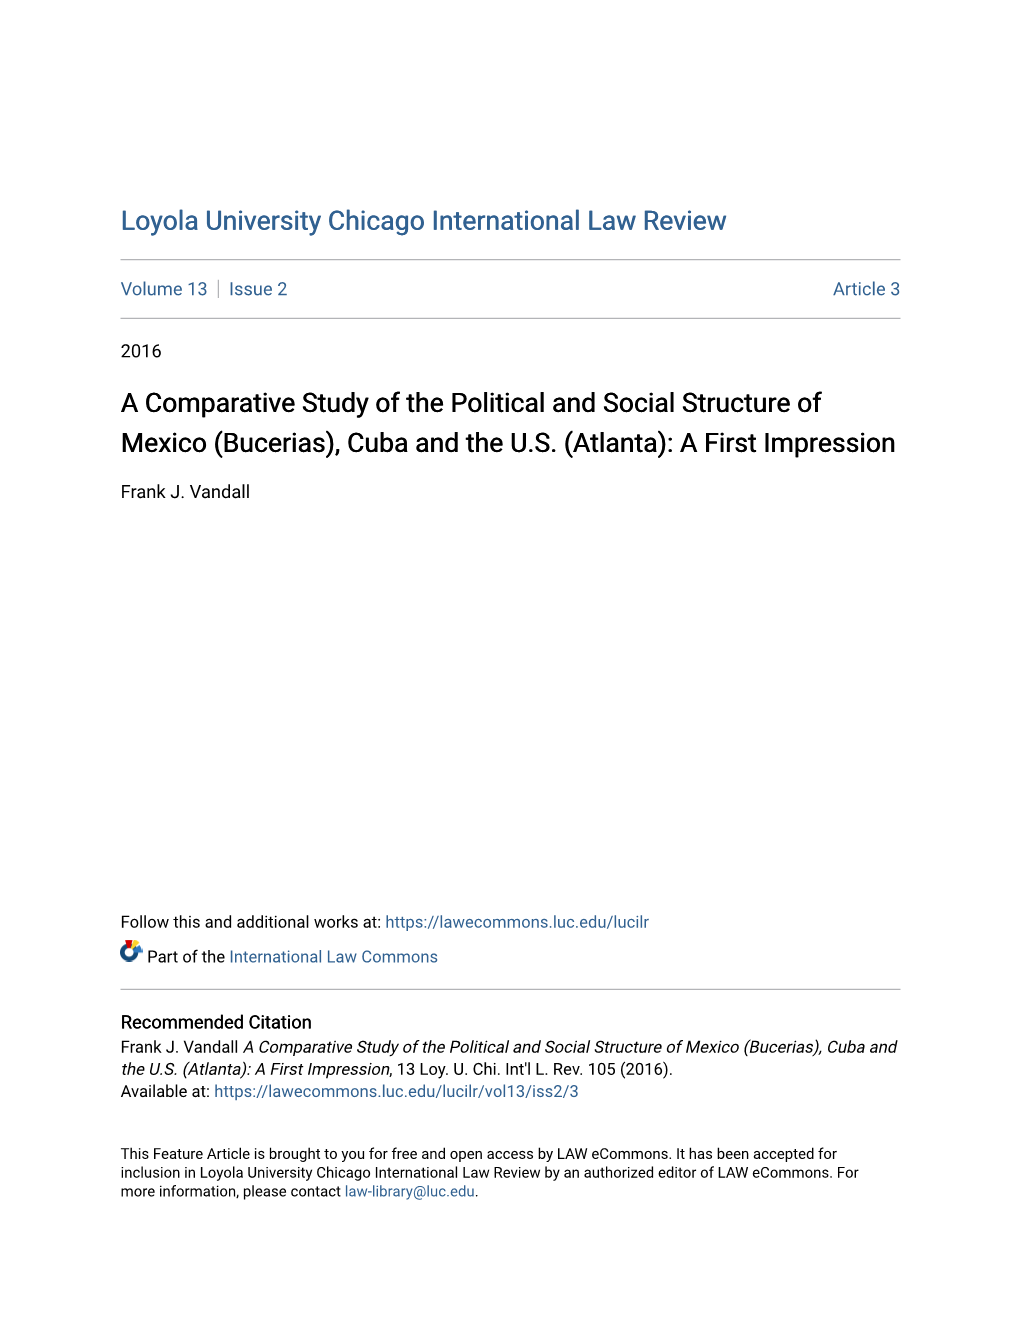 A Comparative Study of the Political and Social Structure of Mexico (Bucerias), Cuba and the U.S